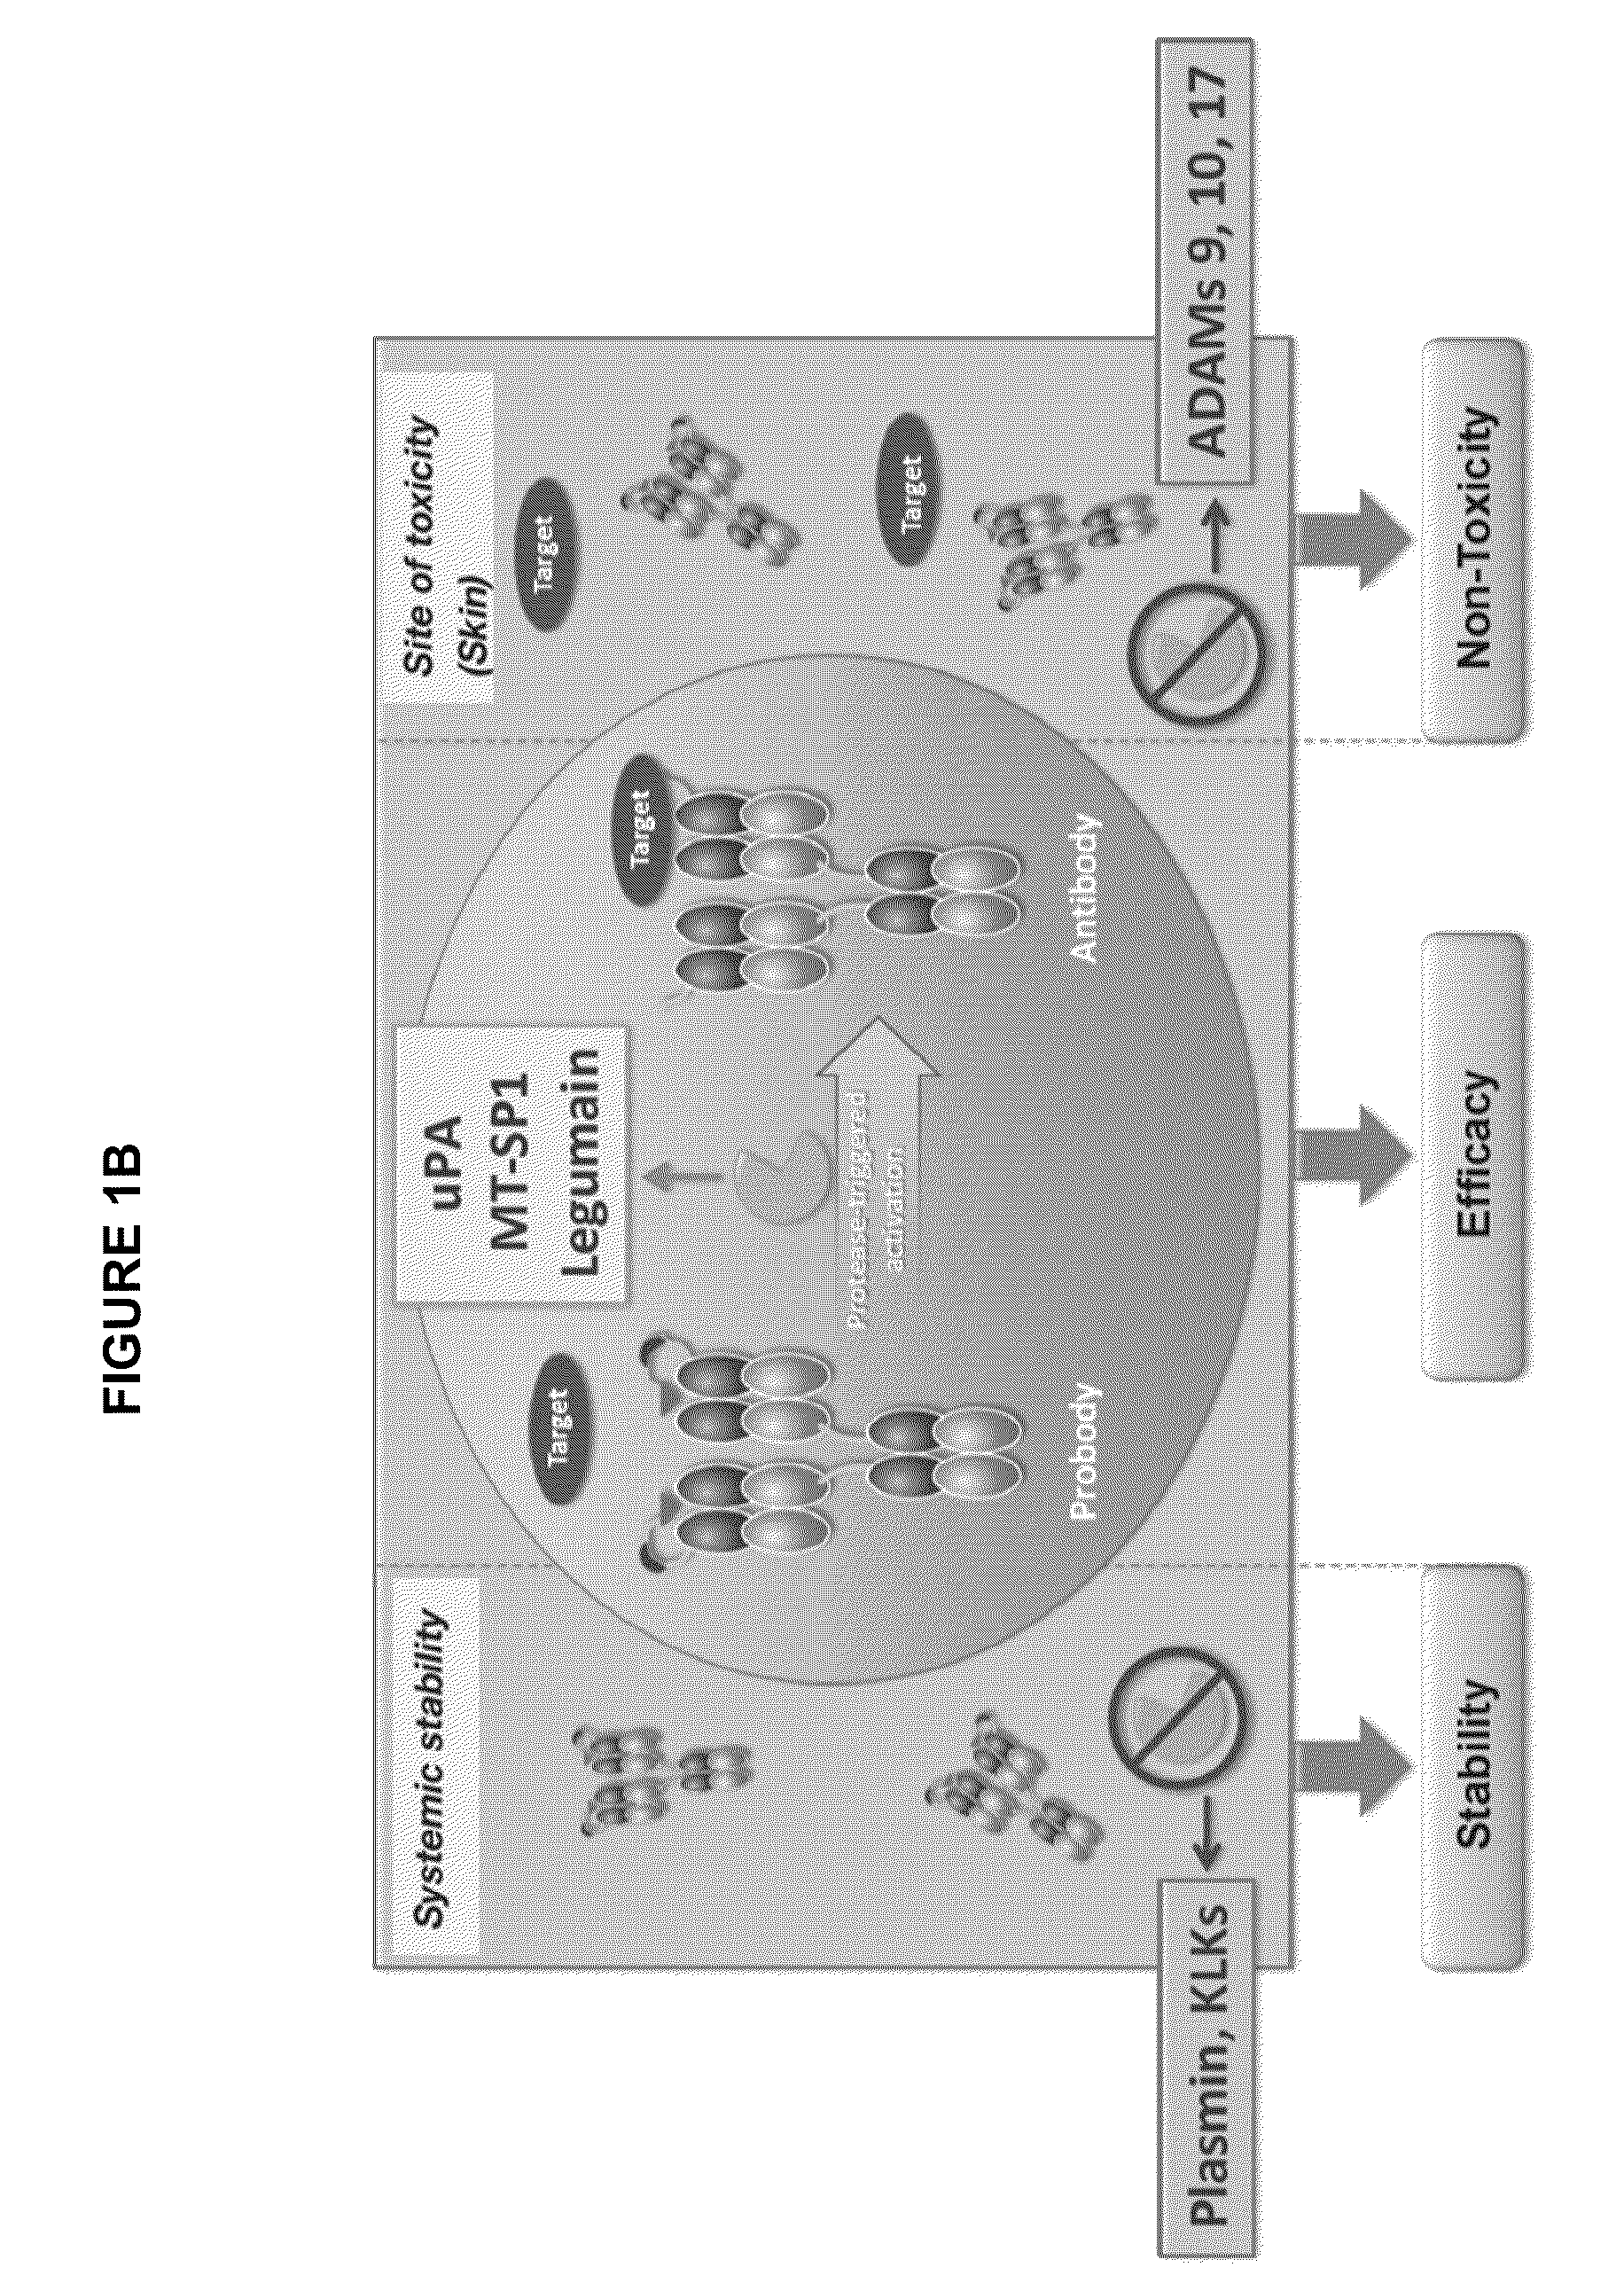 Activatable antibodies that bind epidermal growth factor receptor and methods of use thereof